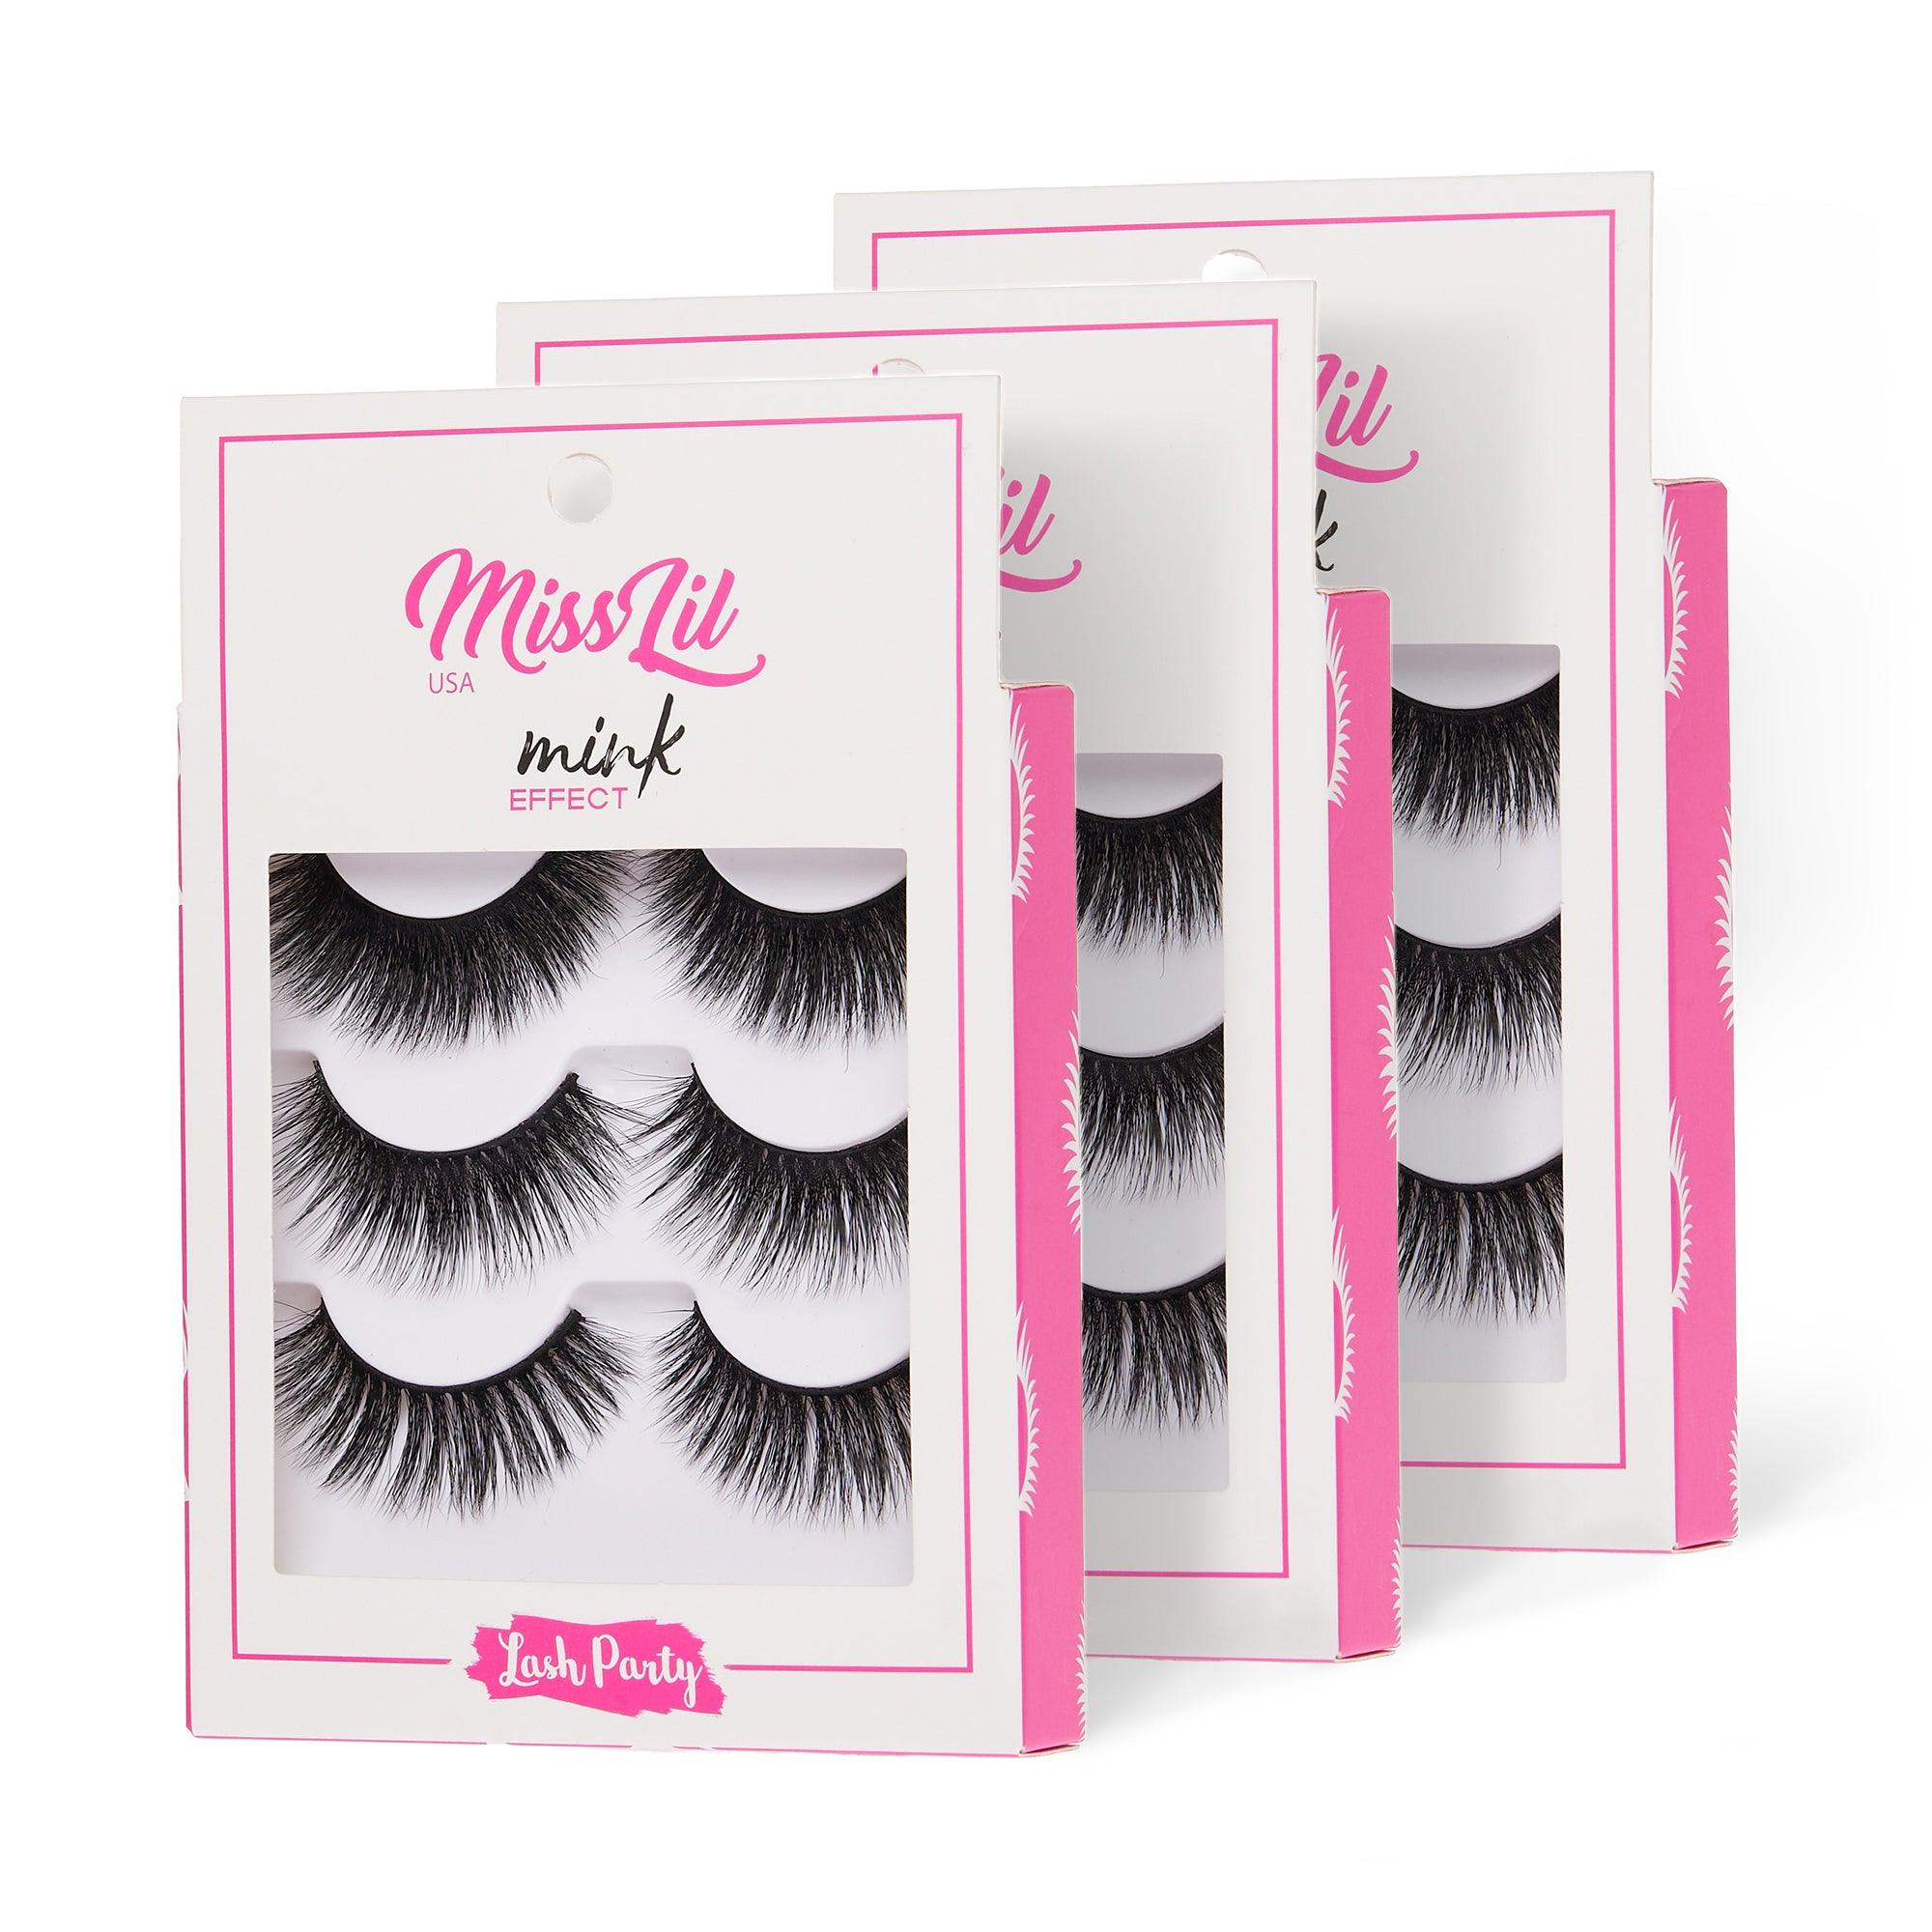 3-Pair Faux Mink Effect Eyelashes - Lash Party Collection #15 - Pack of 3 - Miss Lil USA